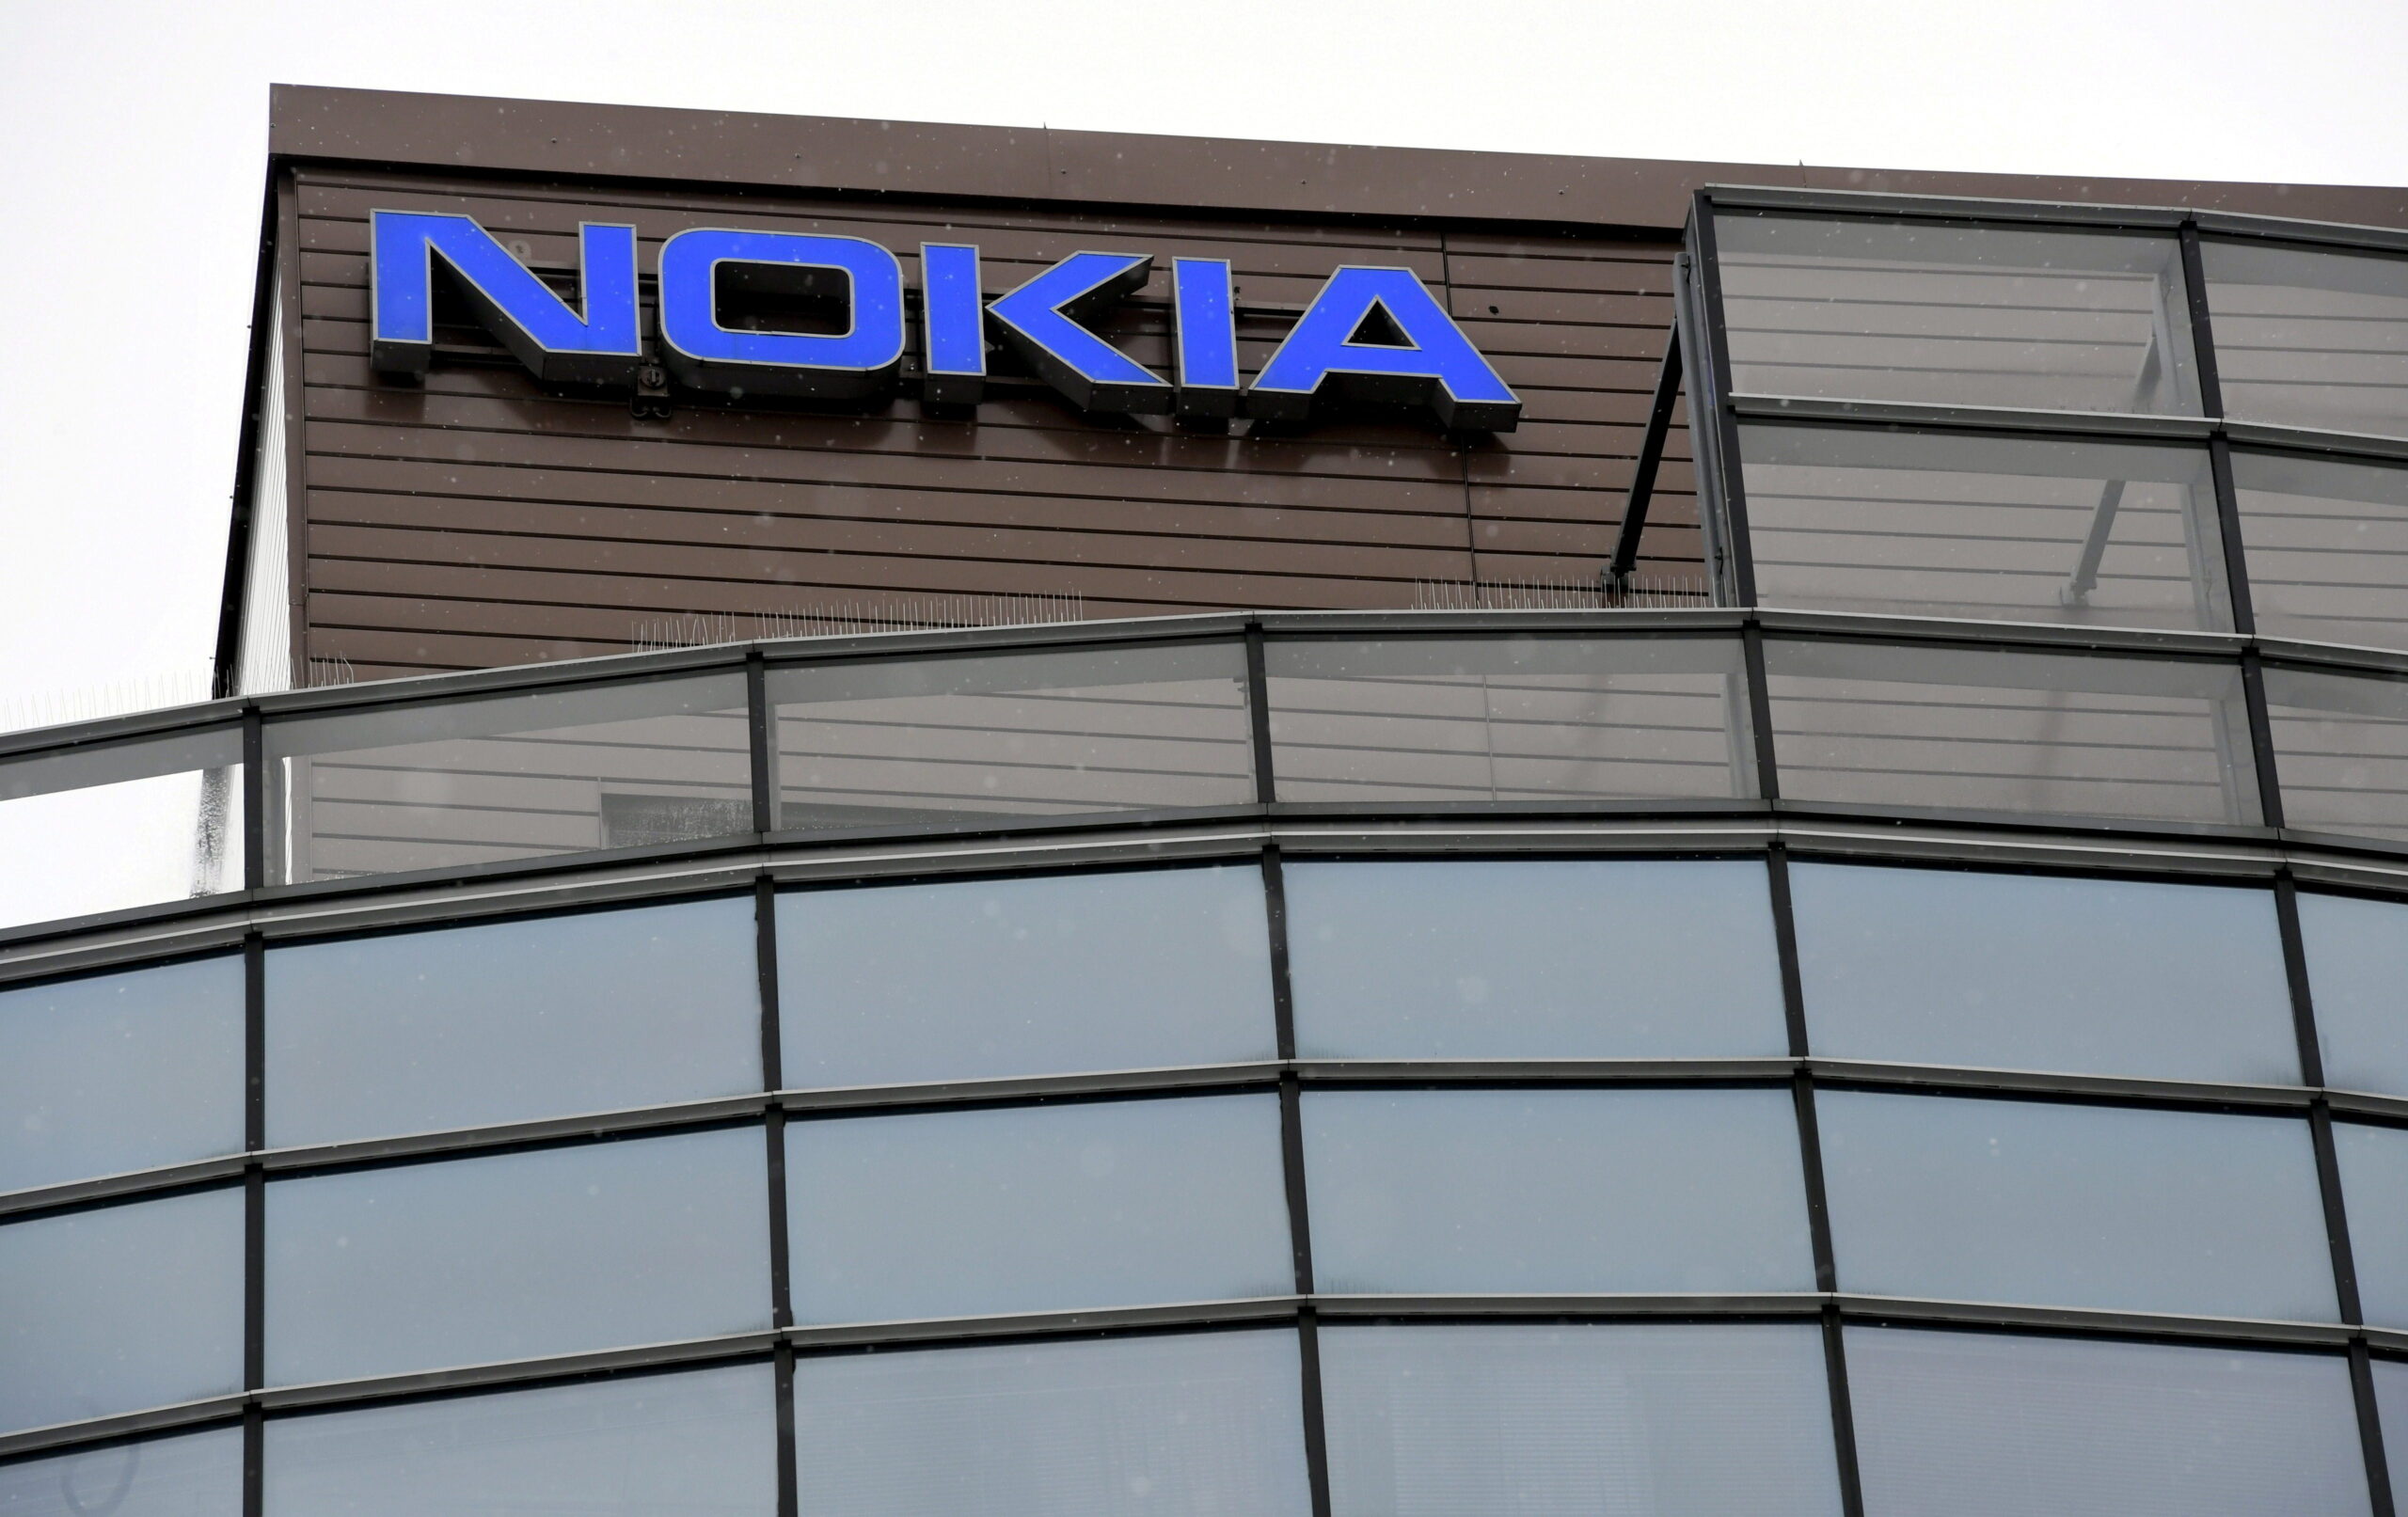 Nokia is said to explore Selling a Managed Services Business